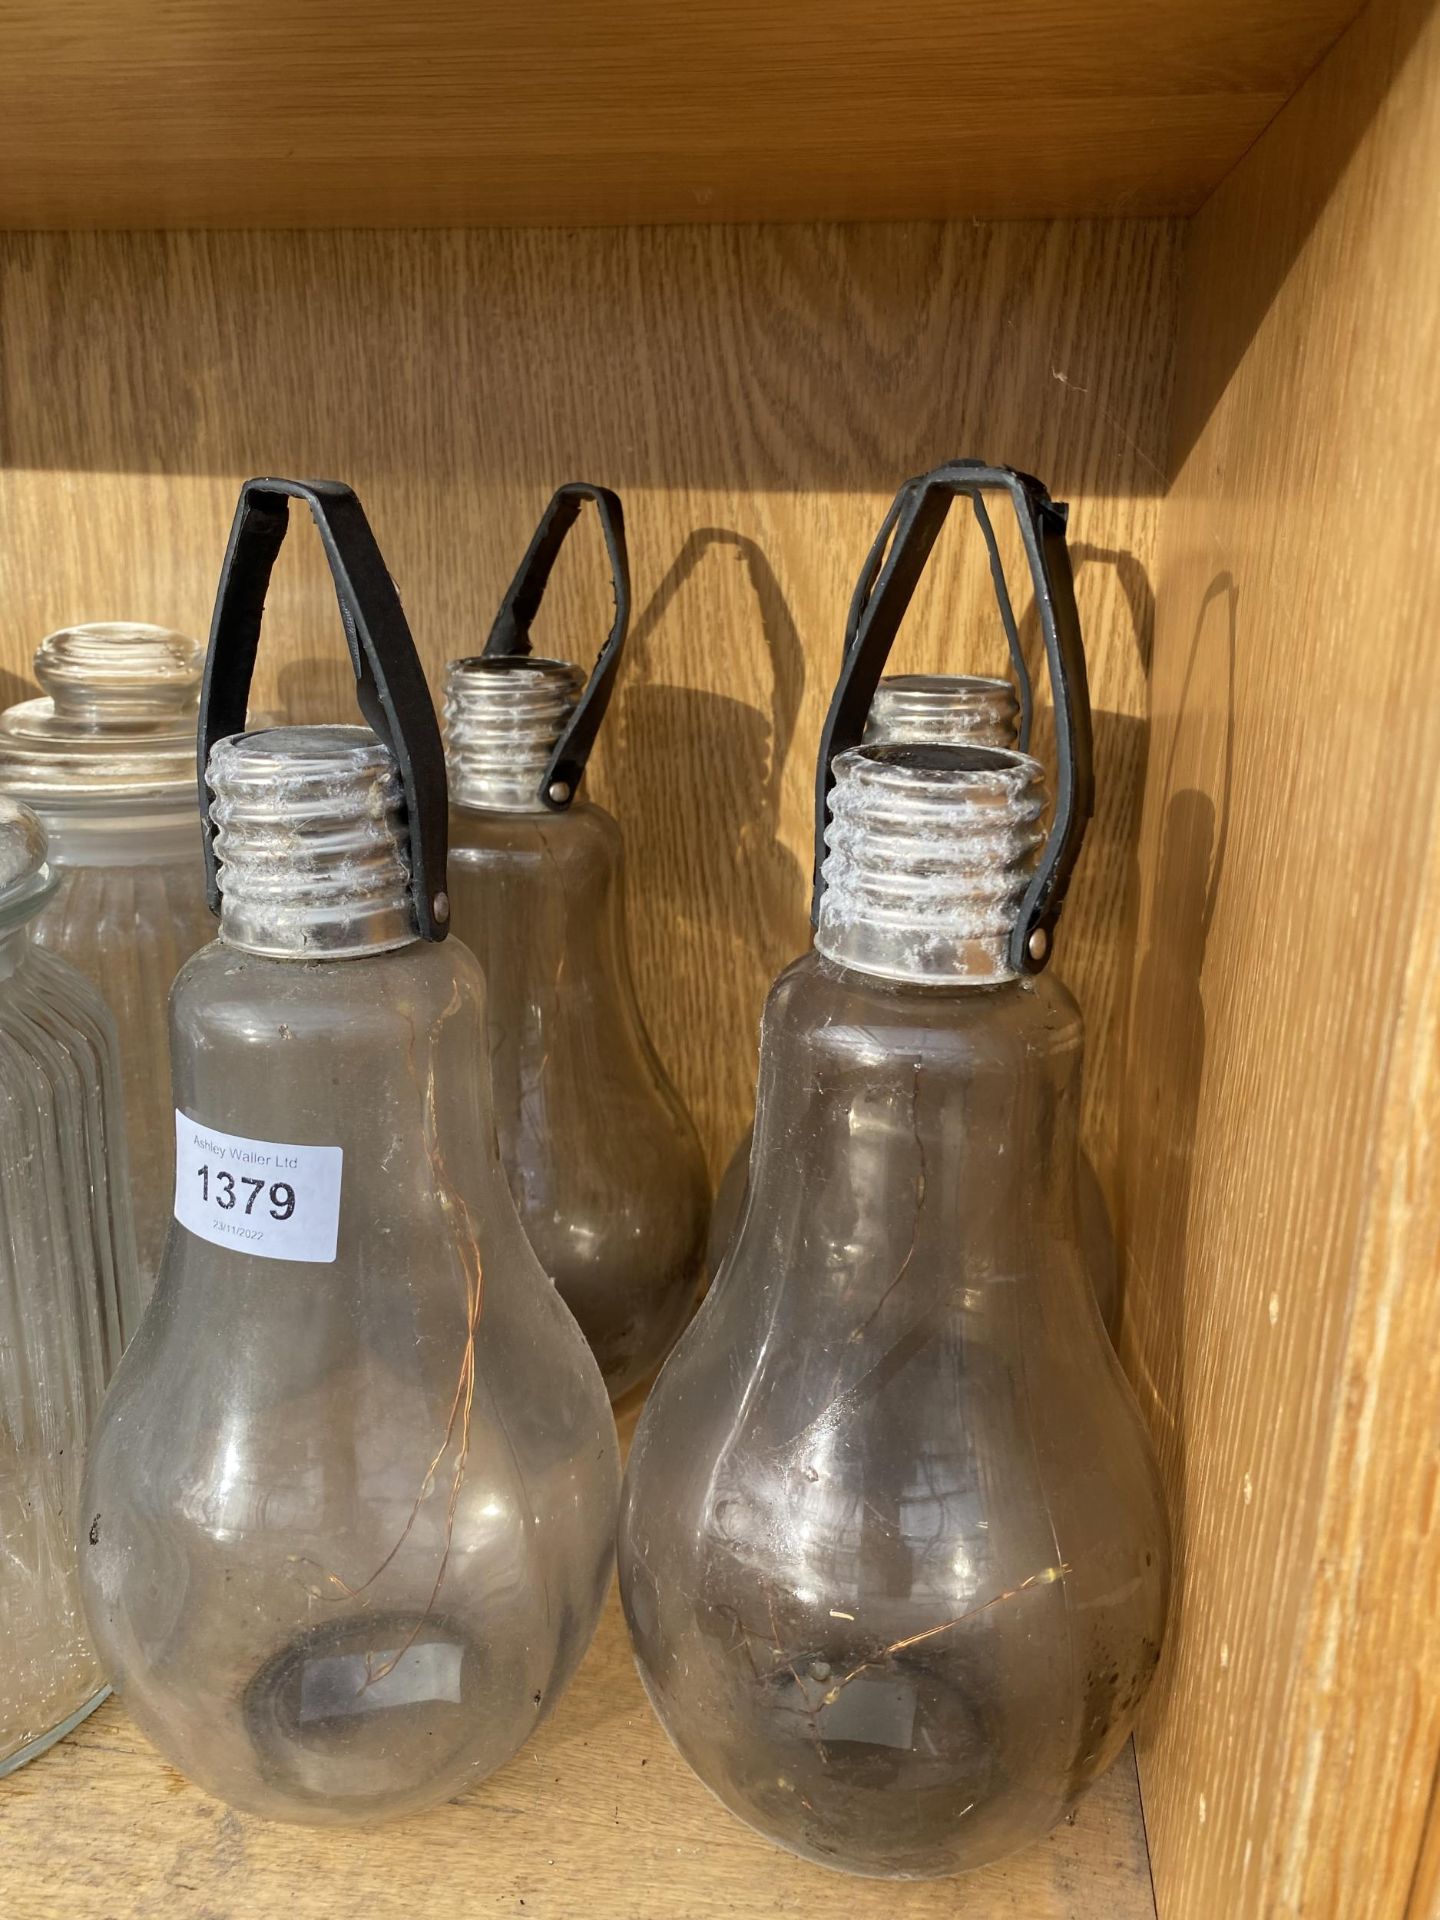 AN ASSORTMENT OF GLASS STORAGE JARS AND GLASS LIGHTS IN THE FORM OF A LIGHT BULB ETC - Image 2 of 3